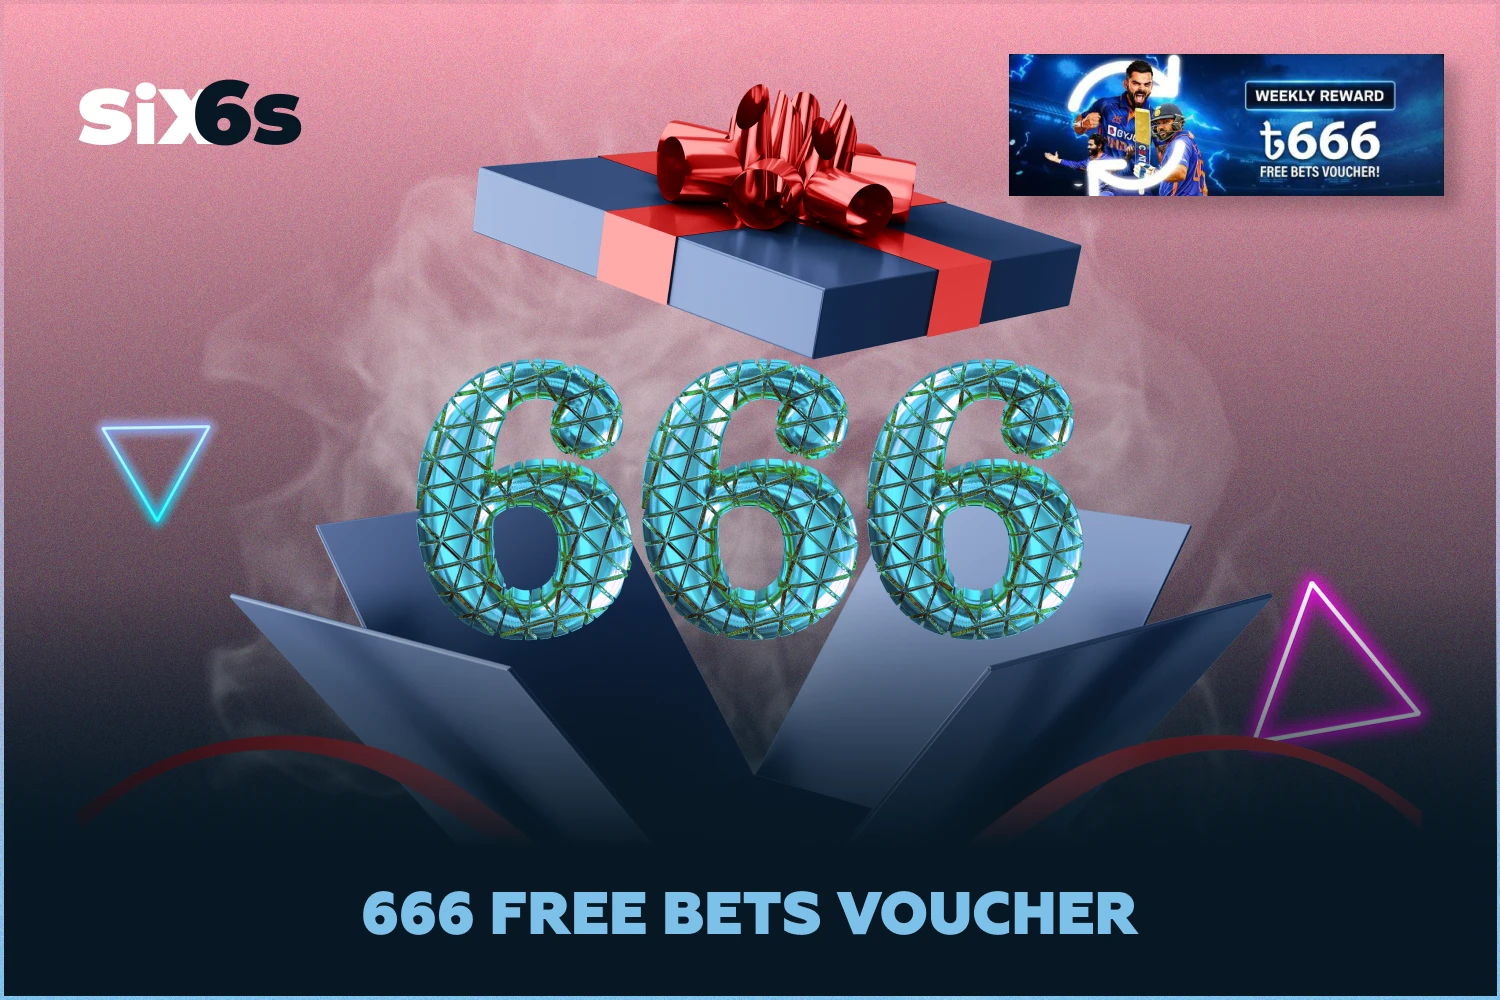 Players from Bangladesh can make a deposit of BDT 1,000 or more at Six6s and get 666 BDT free bet bonus on their balance